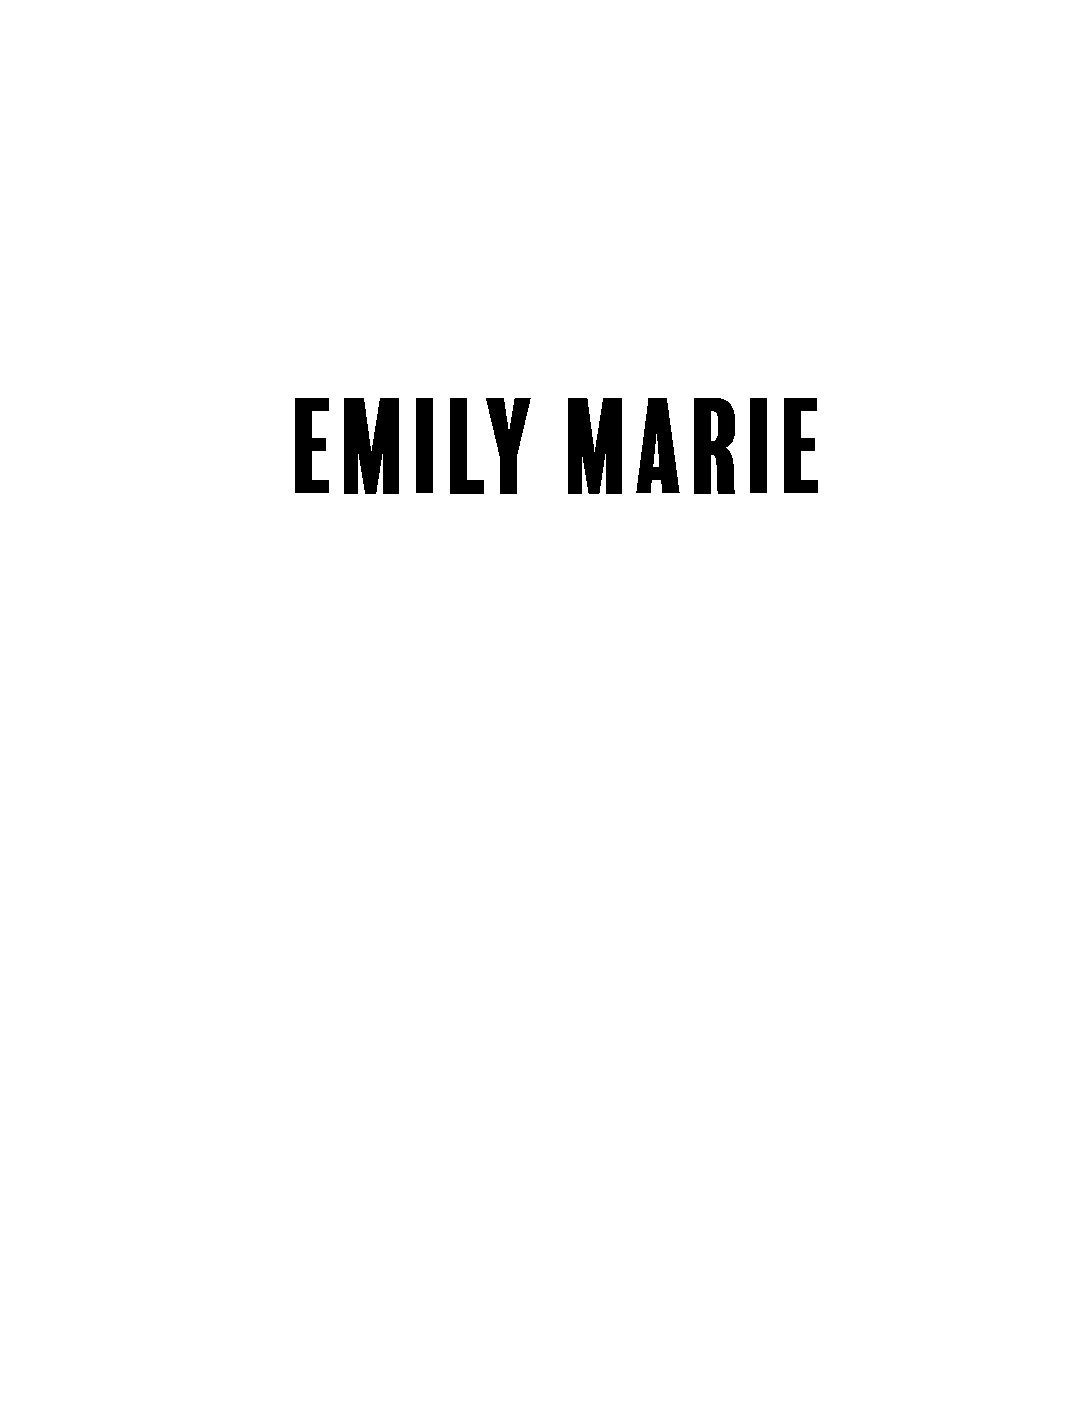 Emily Marie's Tips & Tricks - LEARN MORE, LIVE MORE